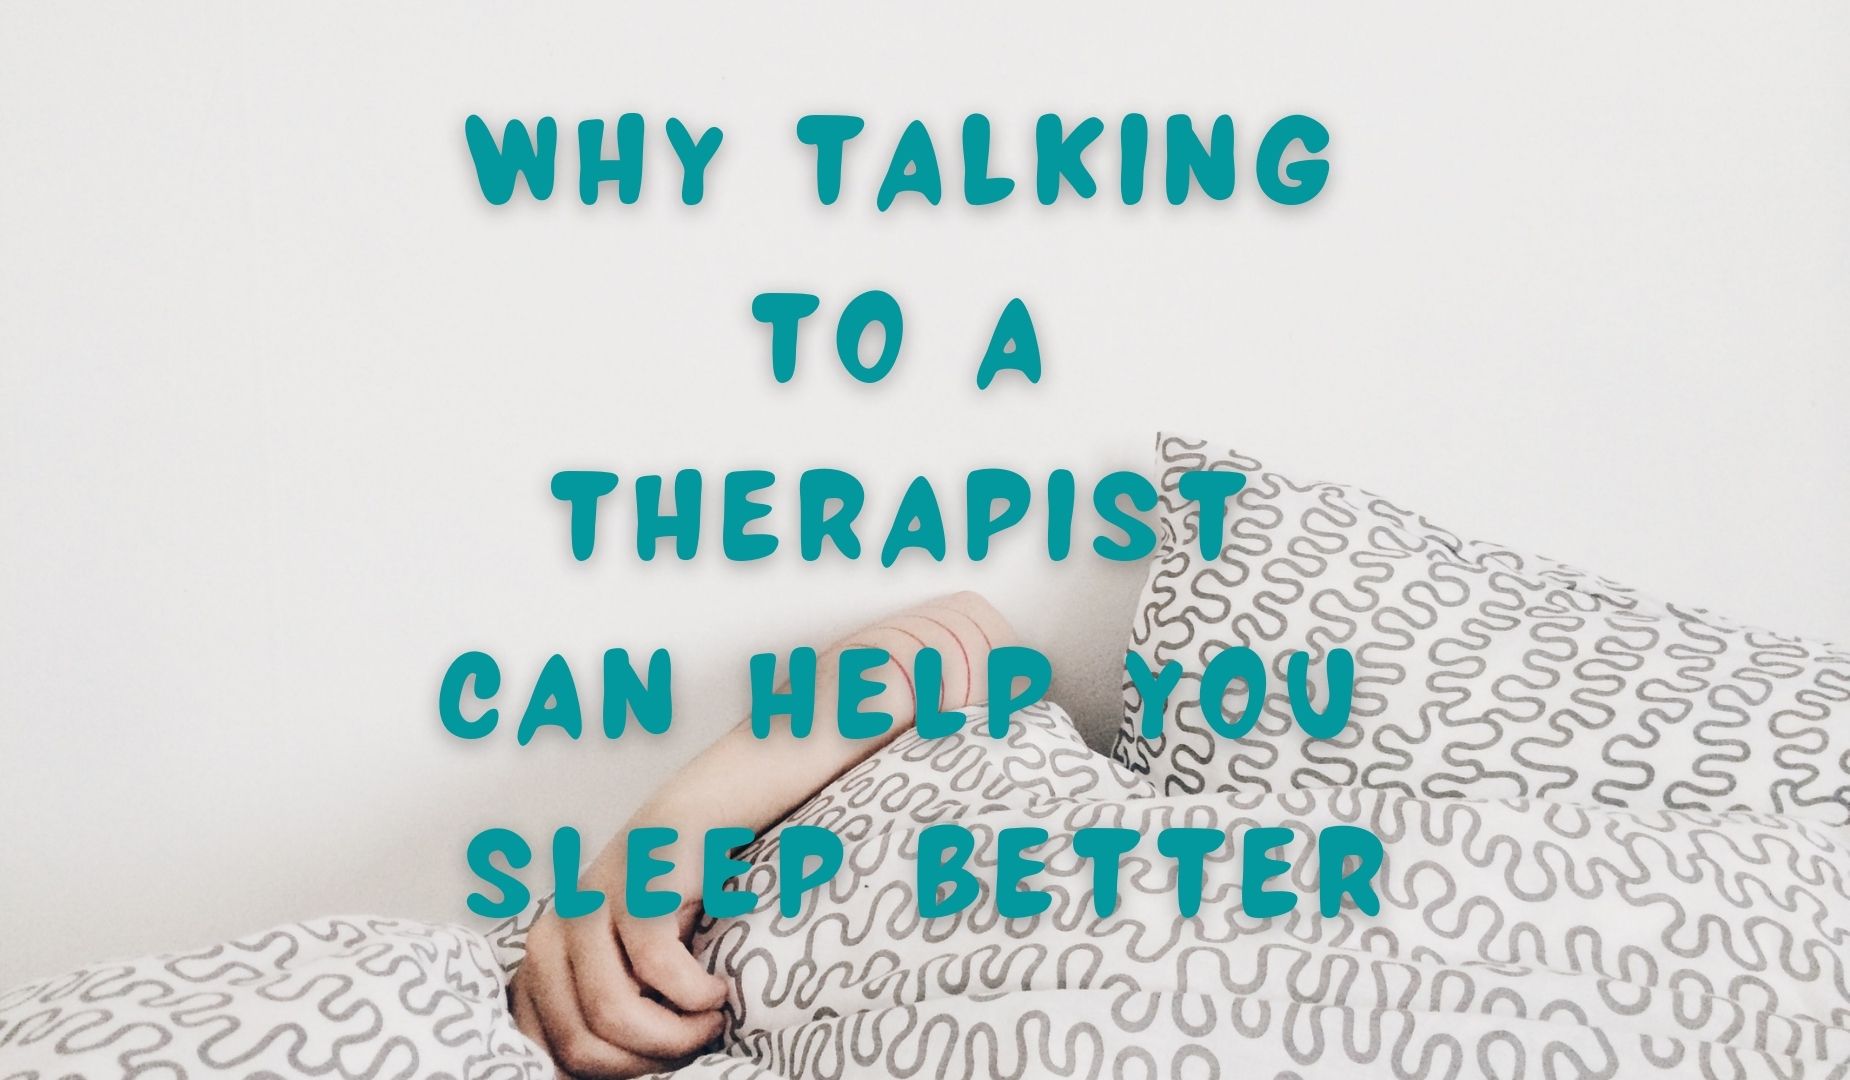 Why Talking to a Therapist Can Help You Sleep Better